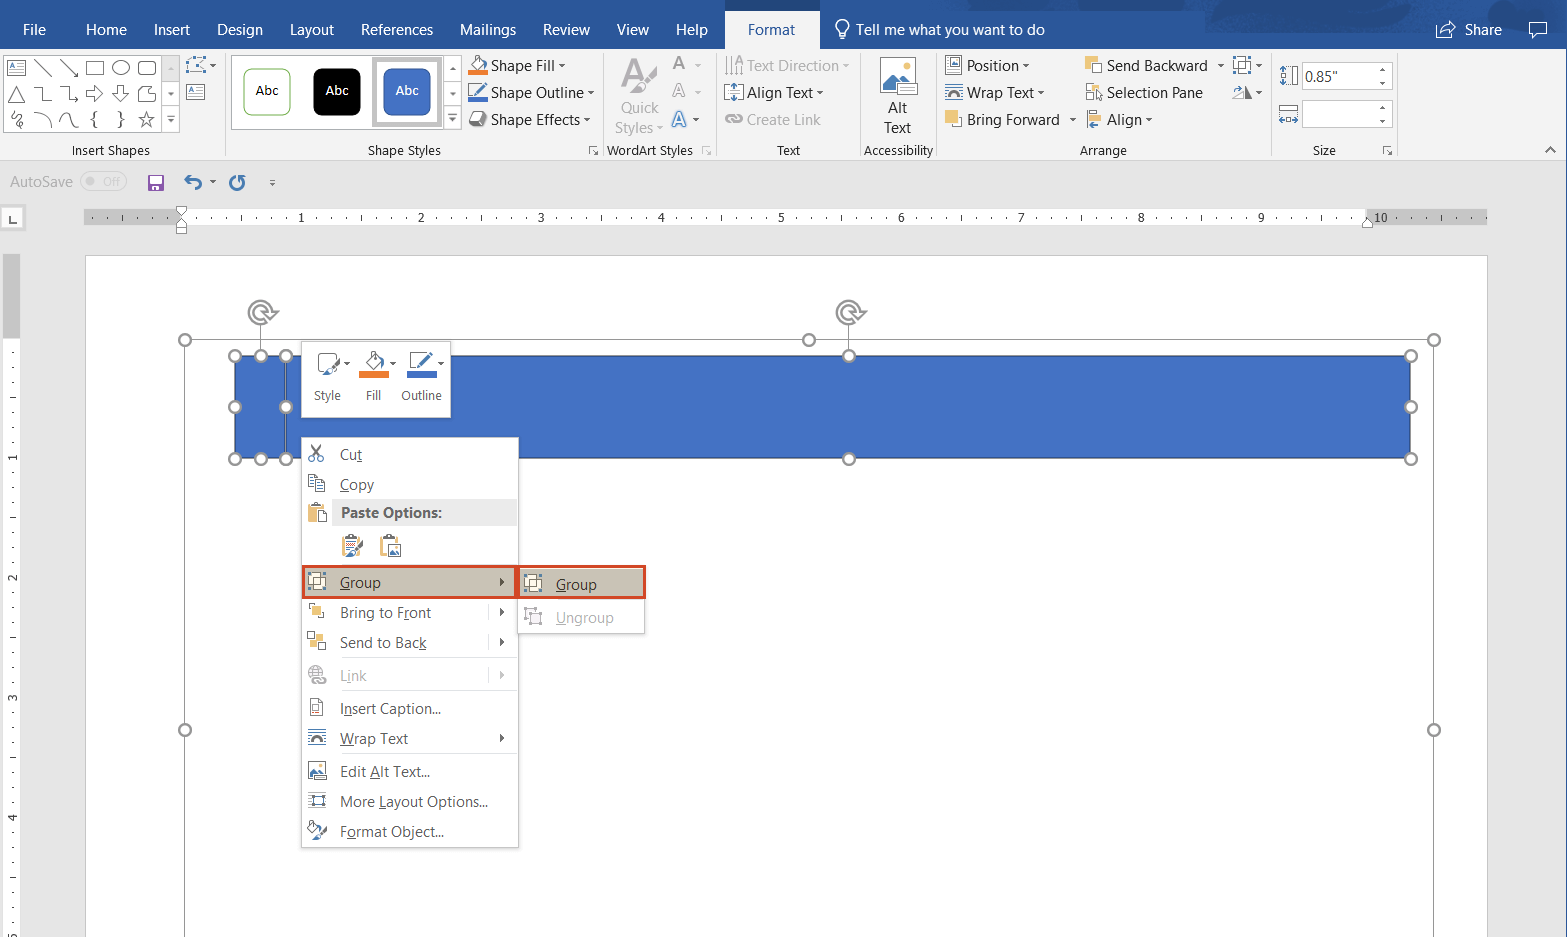 Have a Touch Screen? Use the Inking Features in Office